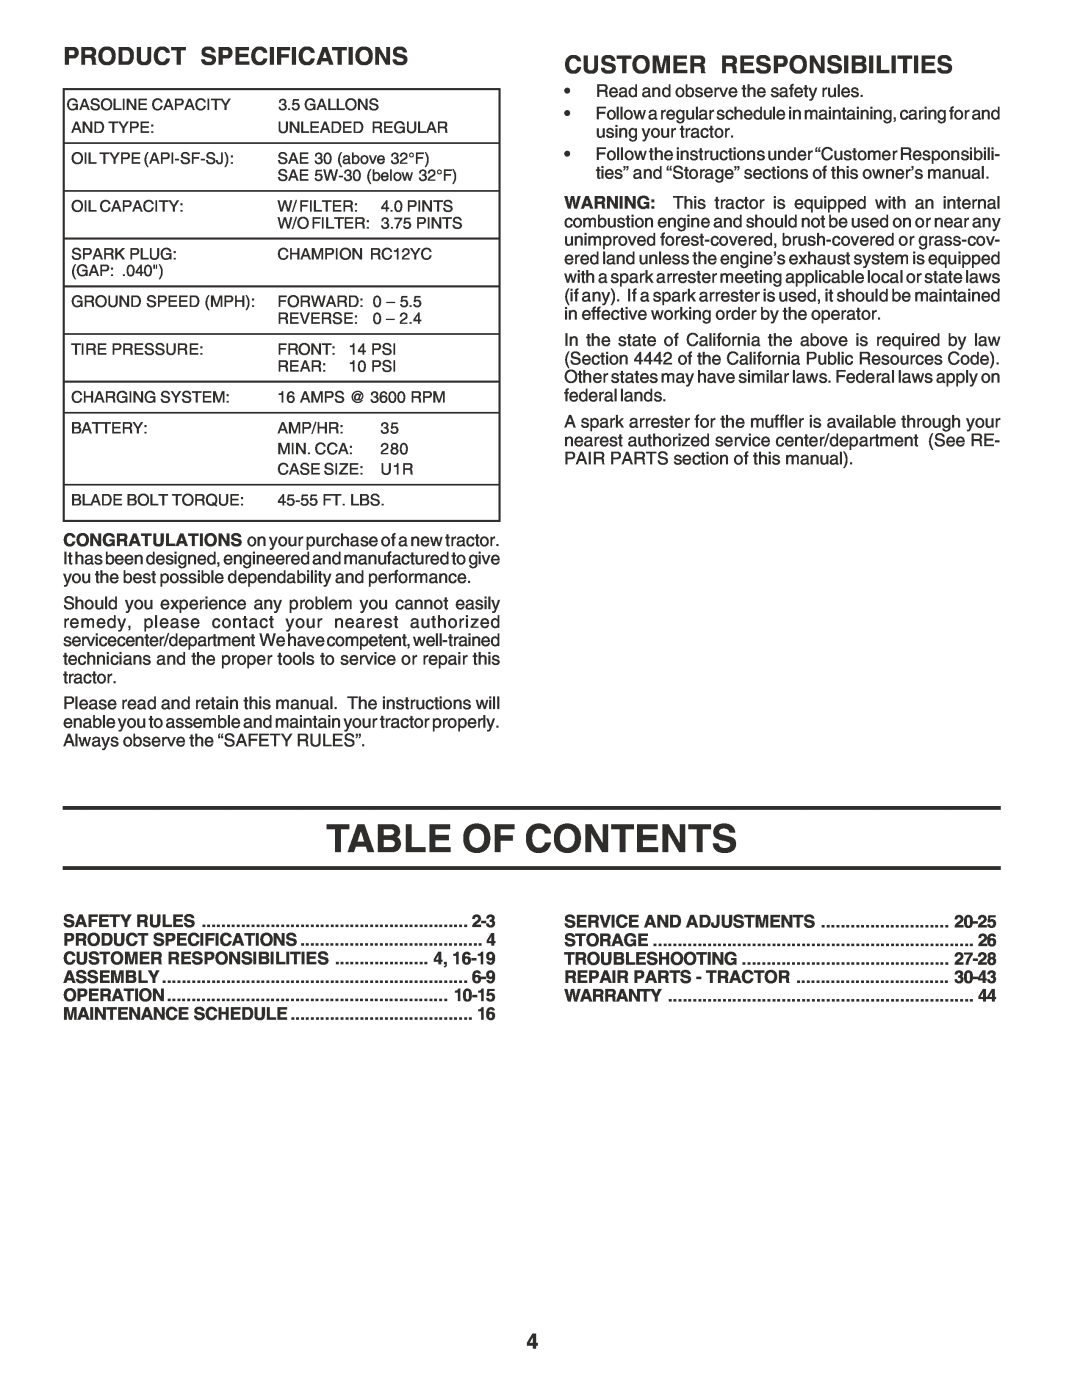 Poulan 180278 Table Of Contents, Product Specifications, Customer Responsibilities, 10-15, Service And Adjustments, 20-25 